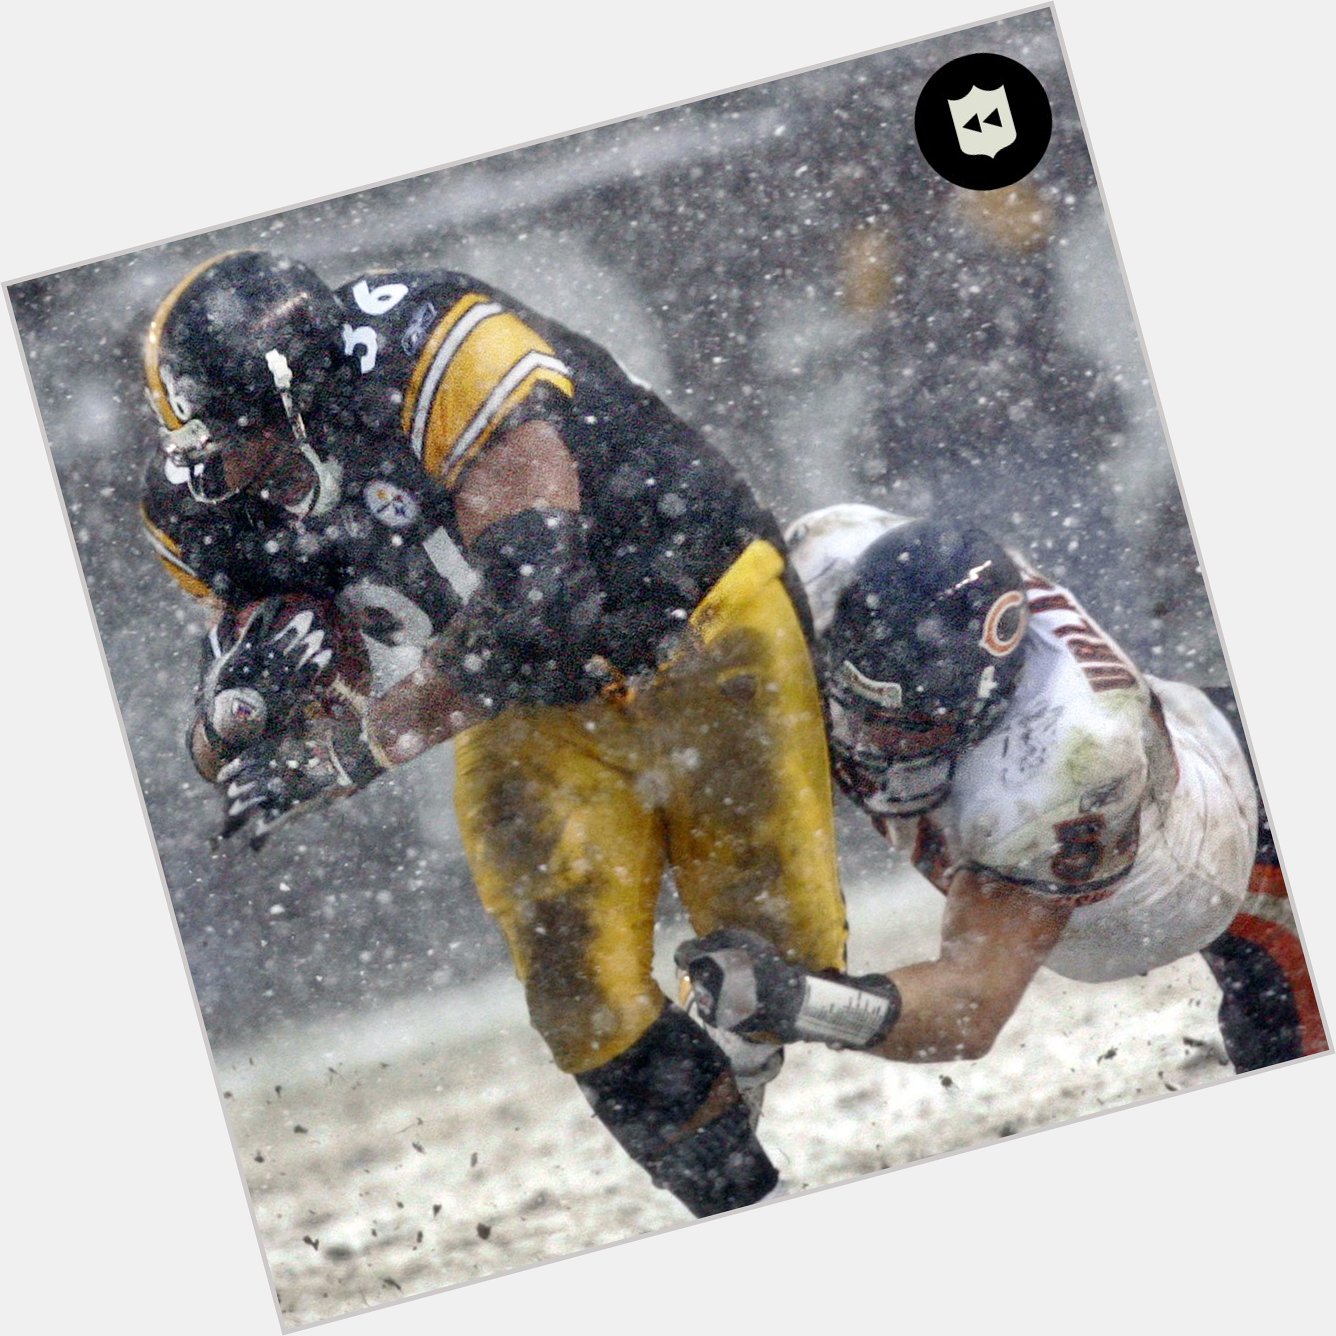 Happy 49th birthday to the Bus, Hall of Fame RB Jerome Bettis 